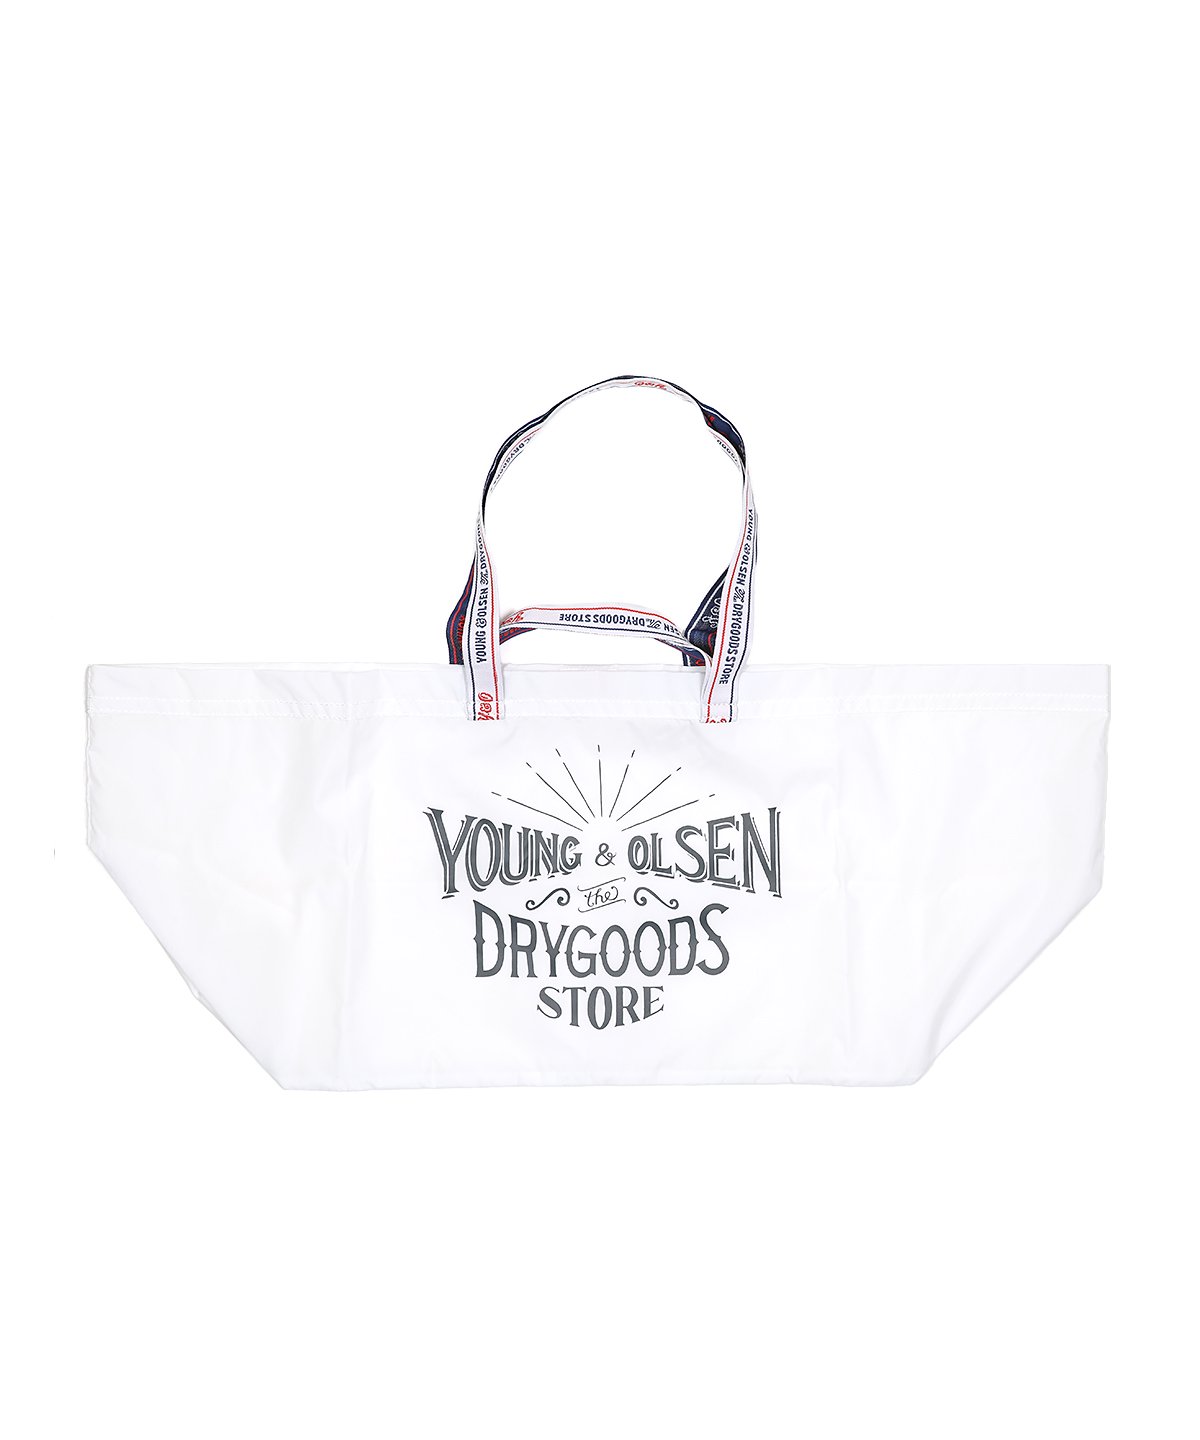 Y&O BIG CARRYING TOTE